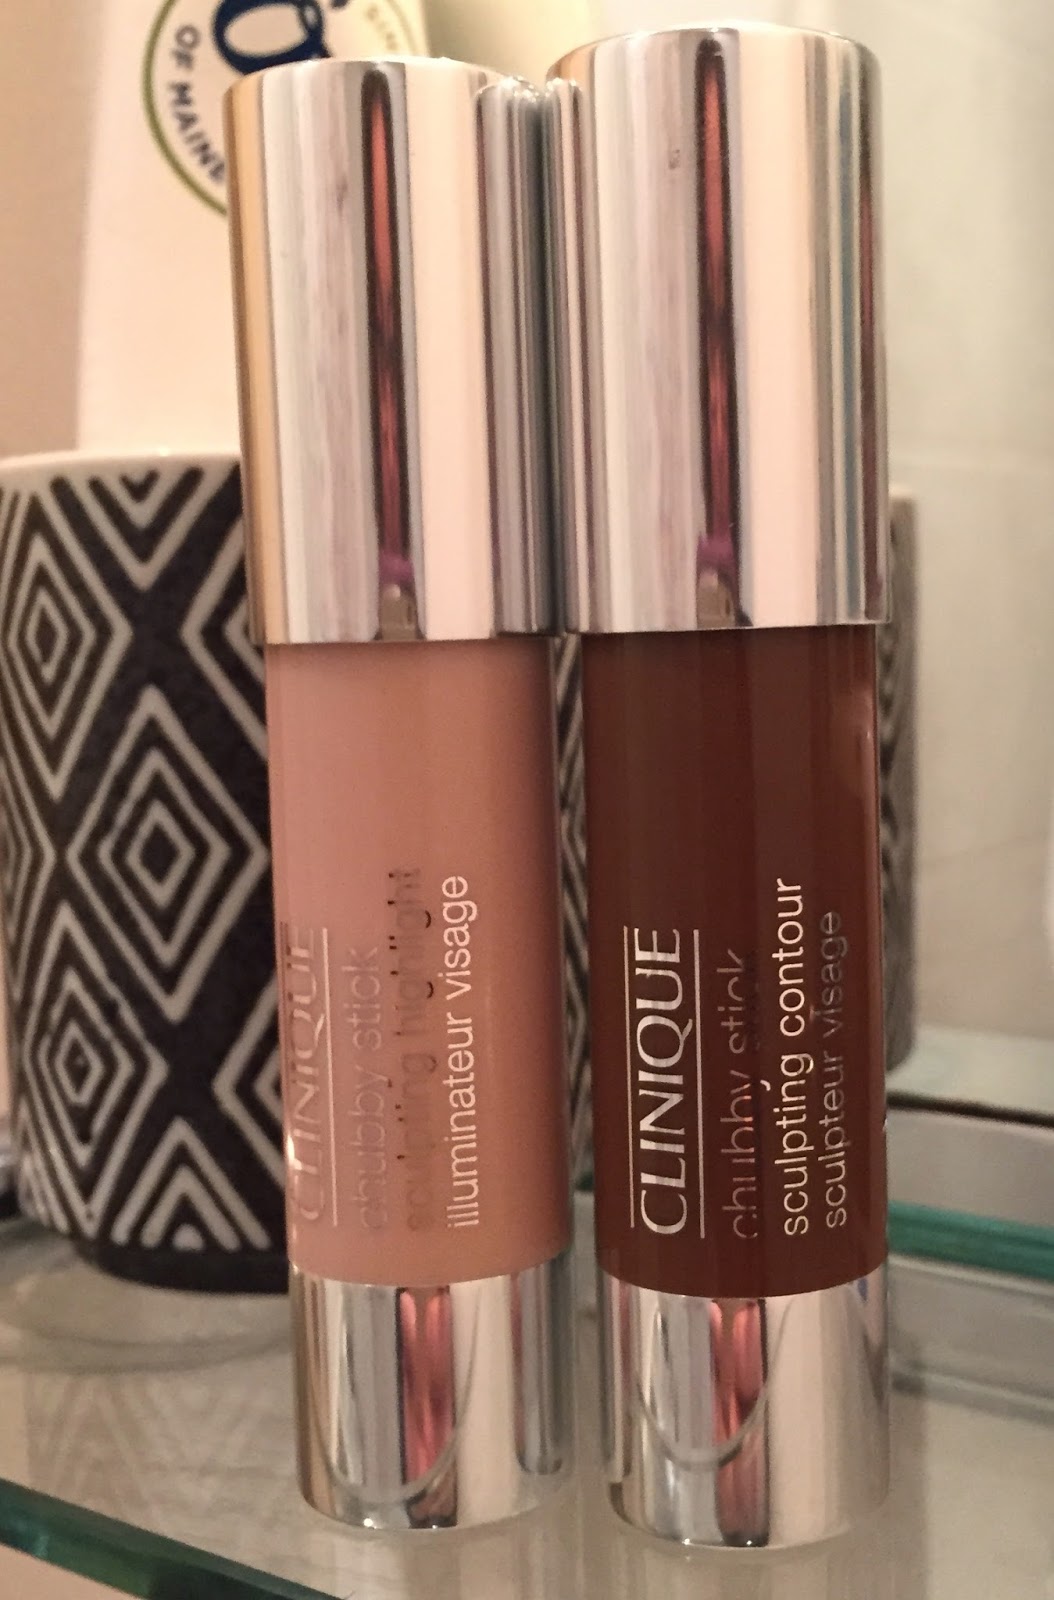 Clinique Chubby Sculpting Sticks in Curvy Contour and Hefty Highlight